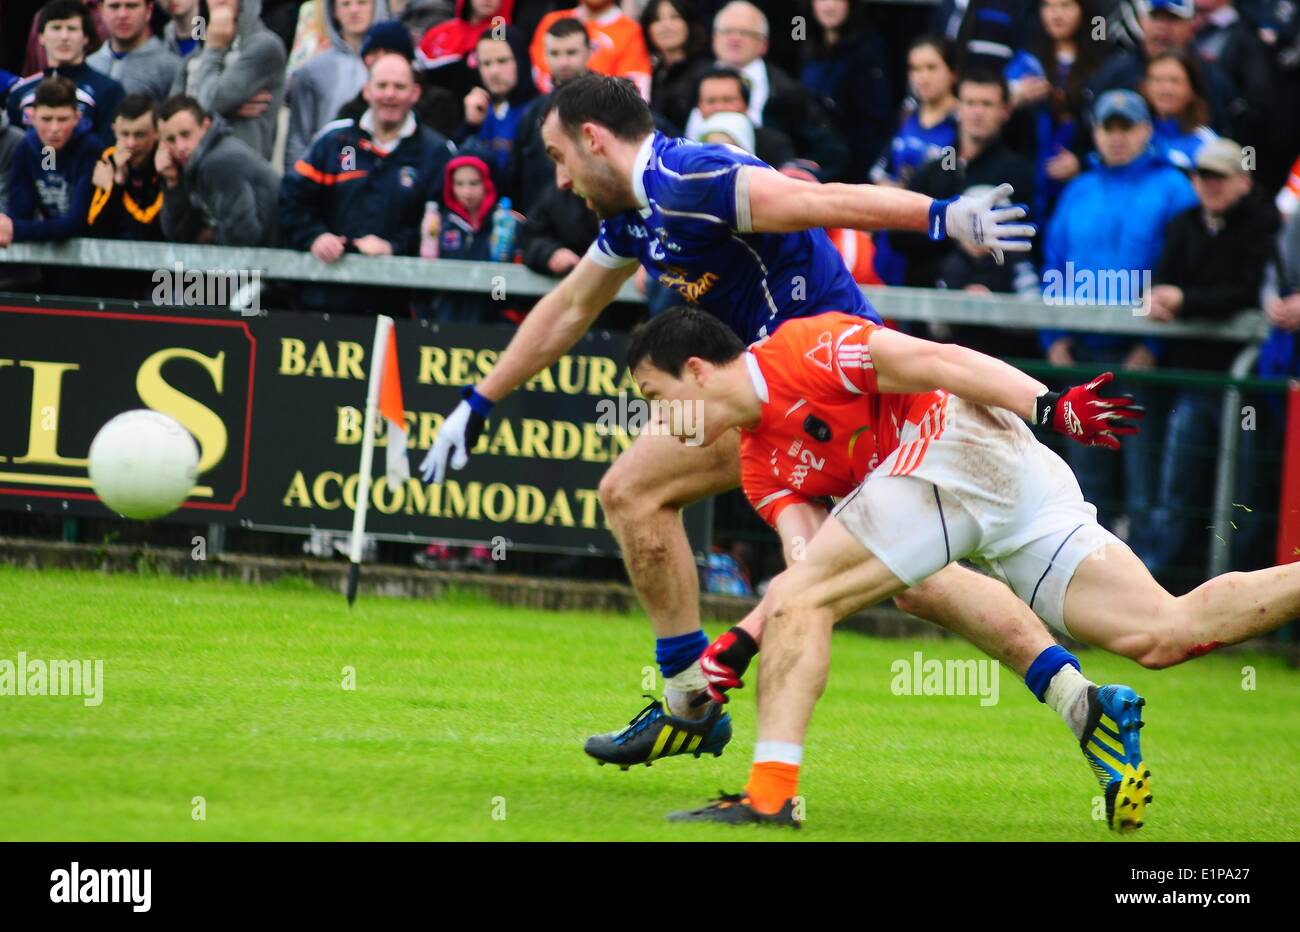 James Morgan and Eugene Keating race for the ball.  Armagh 1-12 Cavan 0-09 Athletic Grounds, Armagh, Co.Armagh  8 June 2014 Credit: LiamMcArdle.com/Alamy Live News Stock Photo